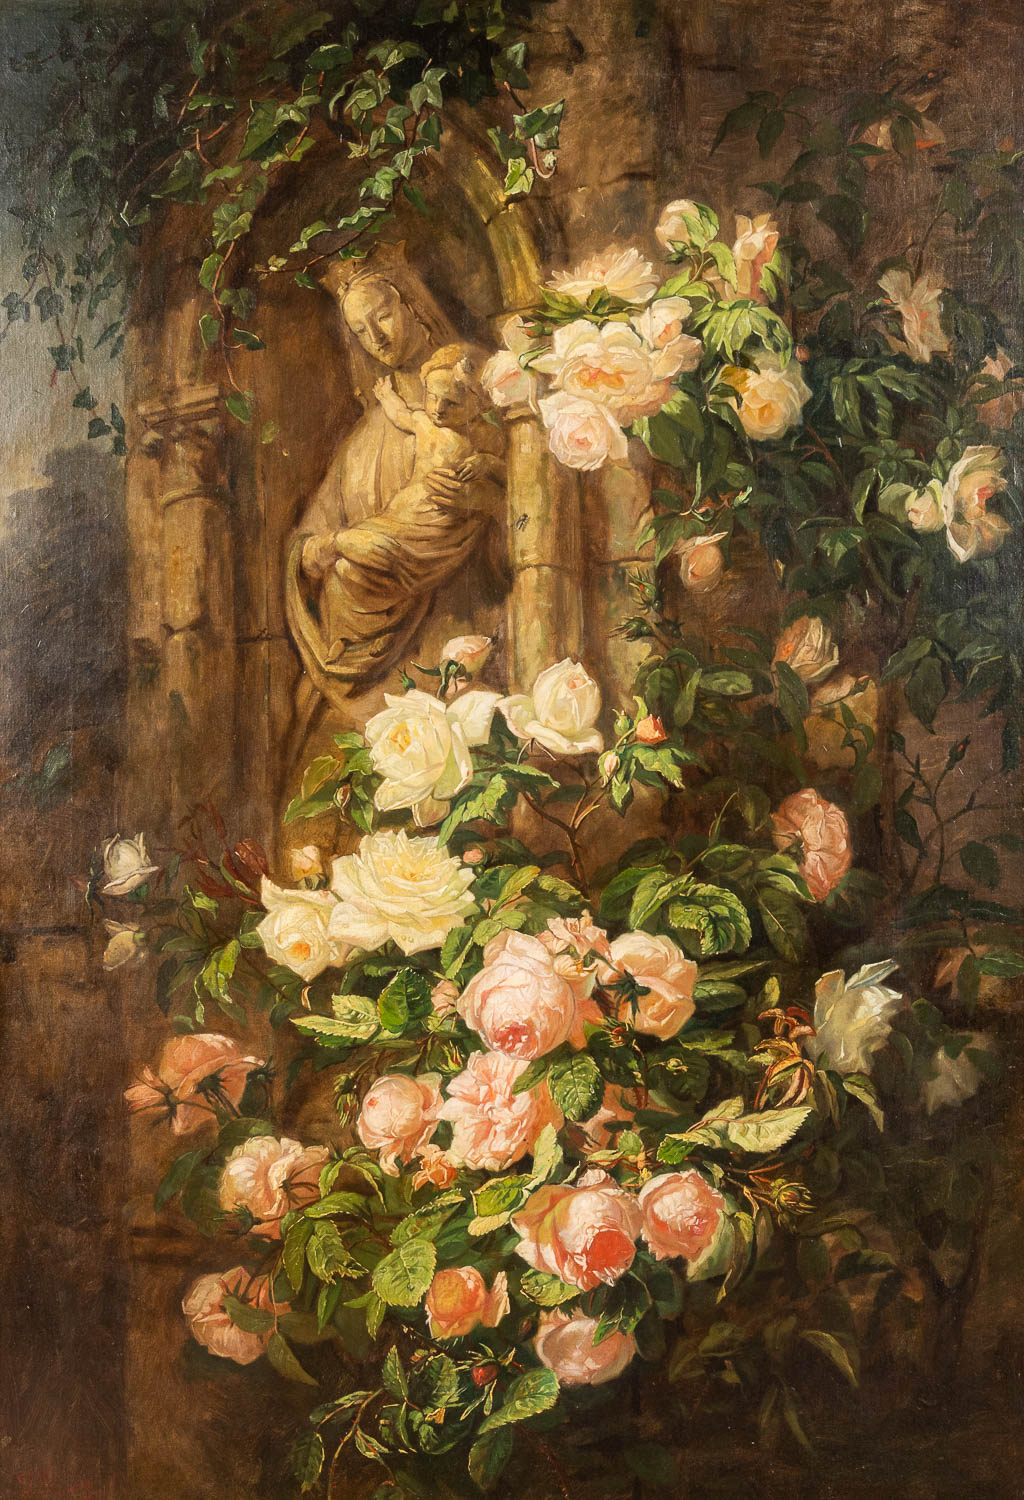 Jean-Baptiste ROBIE (1821-1910) 'Stillife with Madonna and flowers' a fine painting, oil on canvas. (W:80 x H:115 cm)